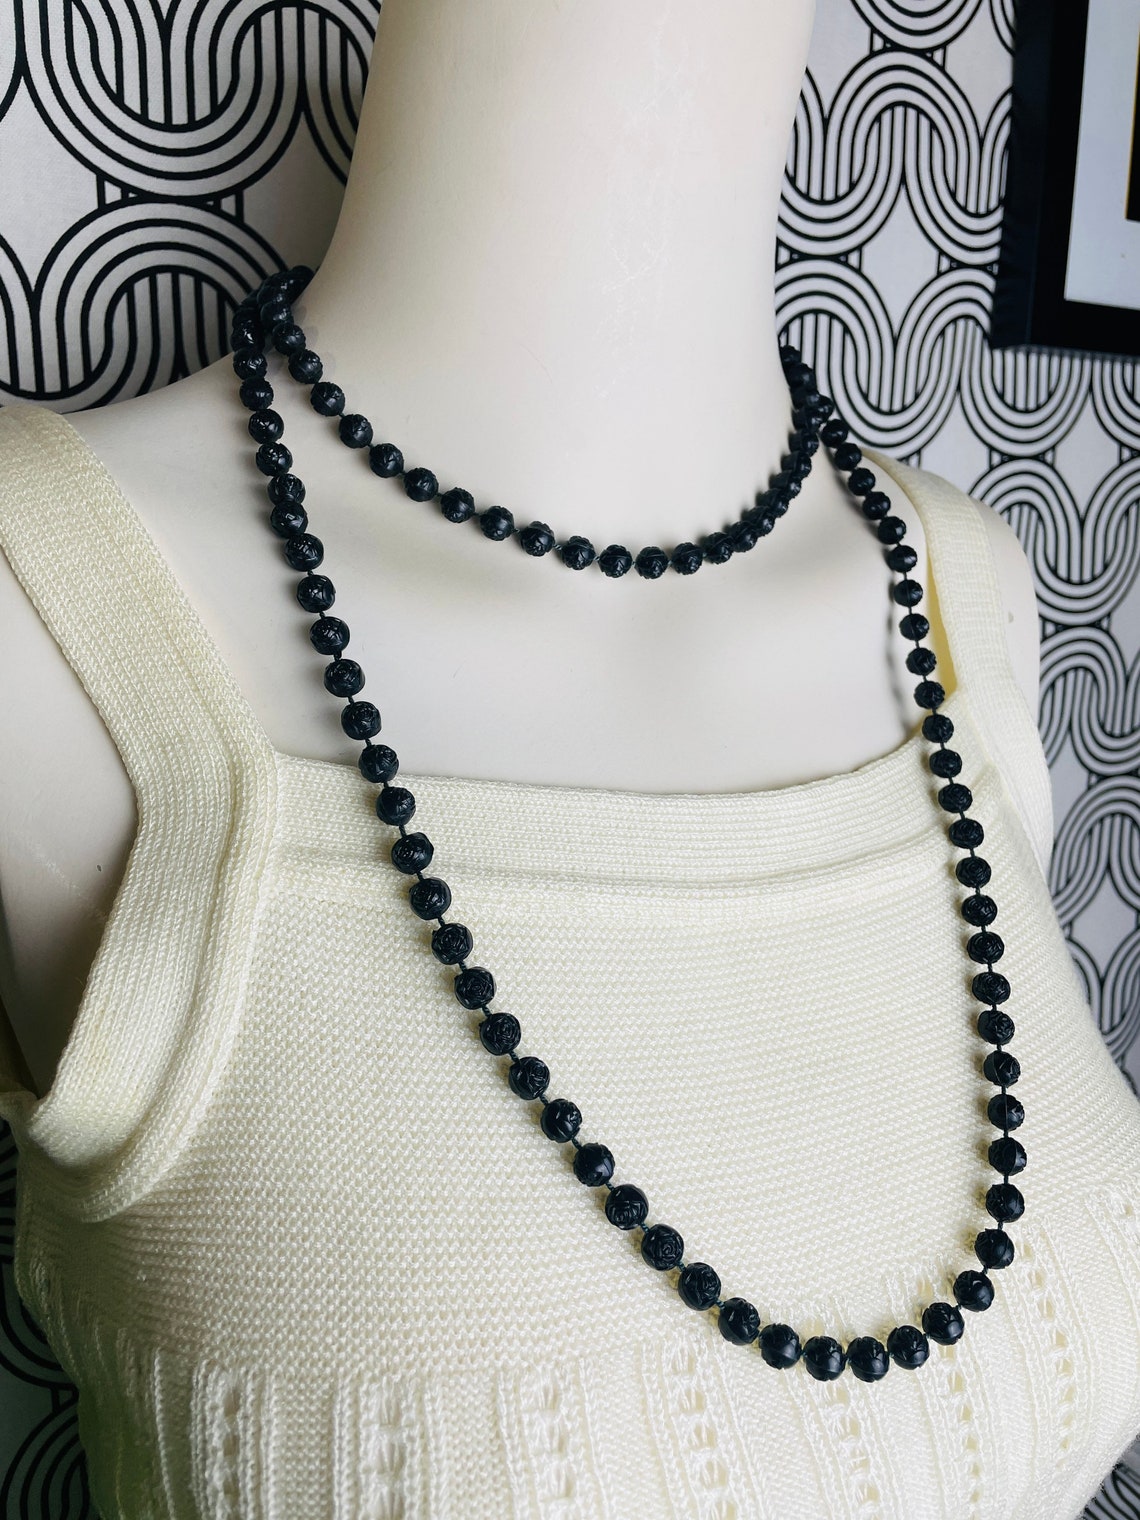 80s beaded necklaces. Black and white different lengths | Etsy